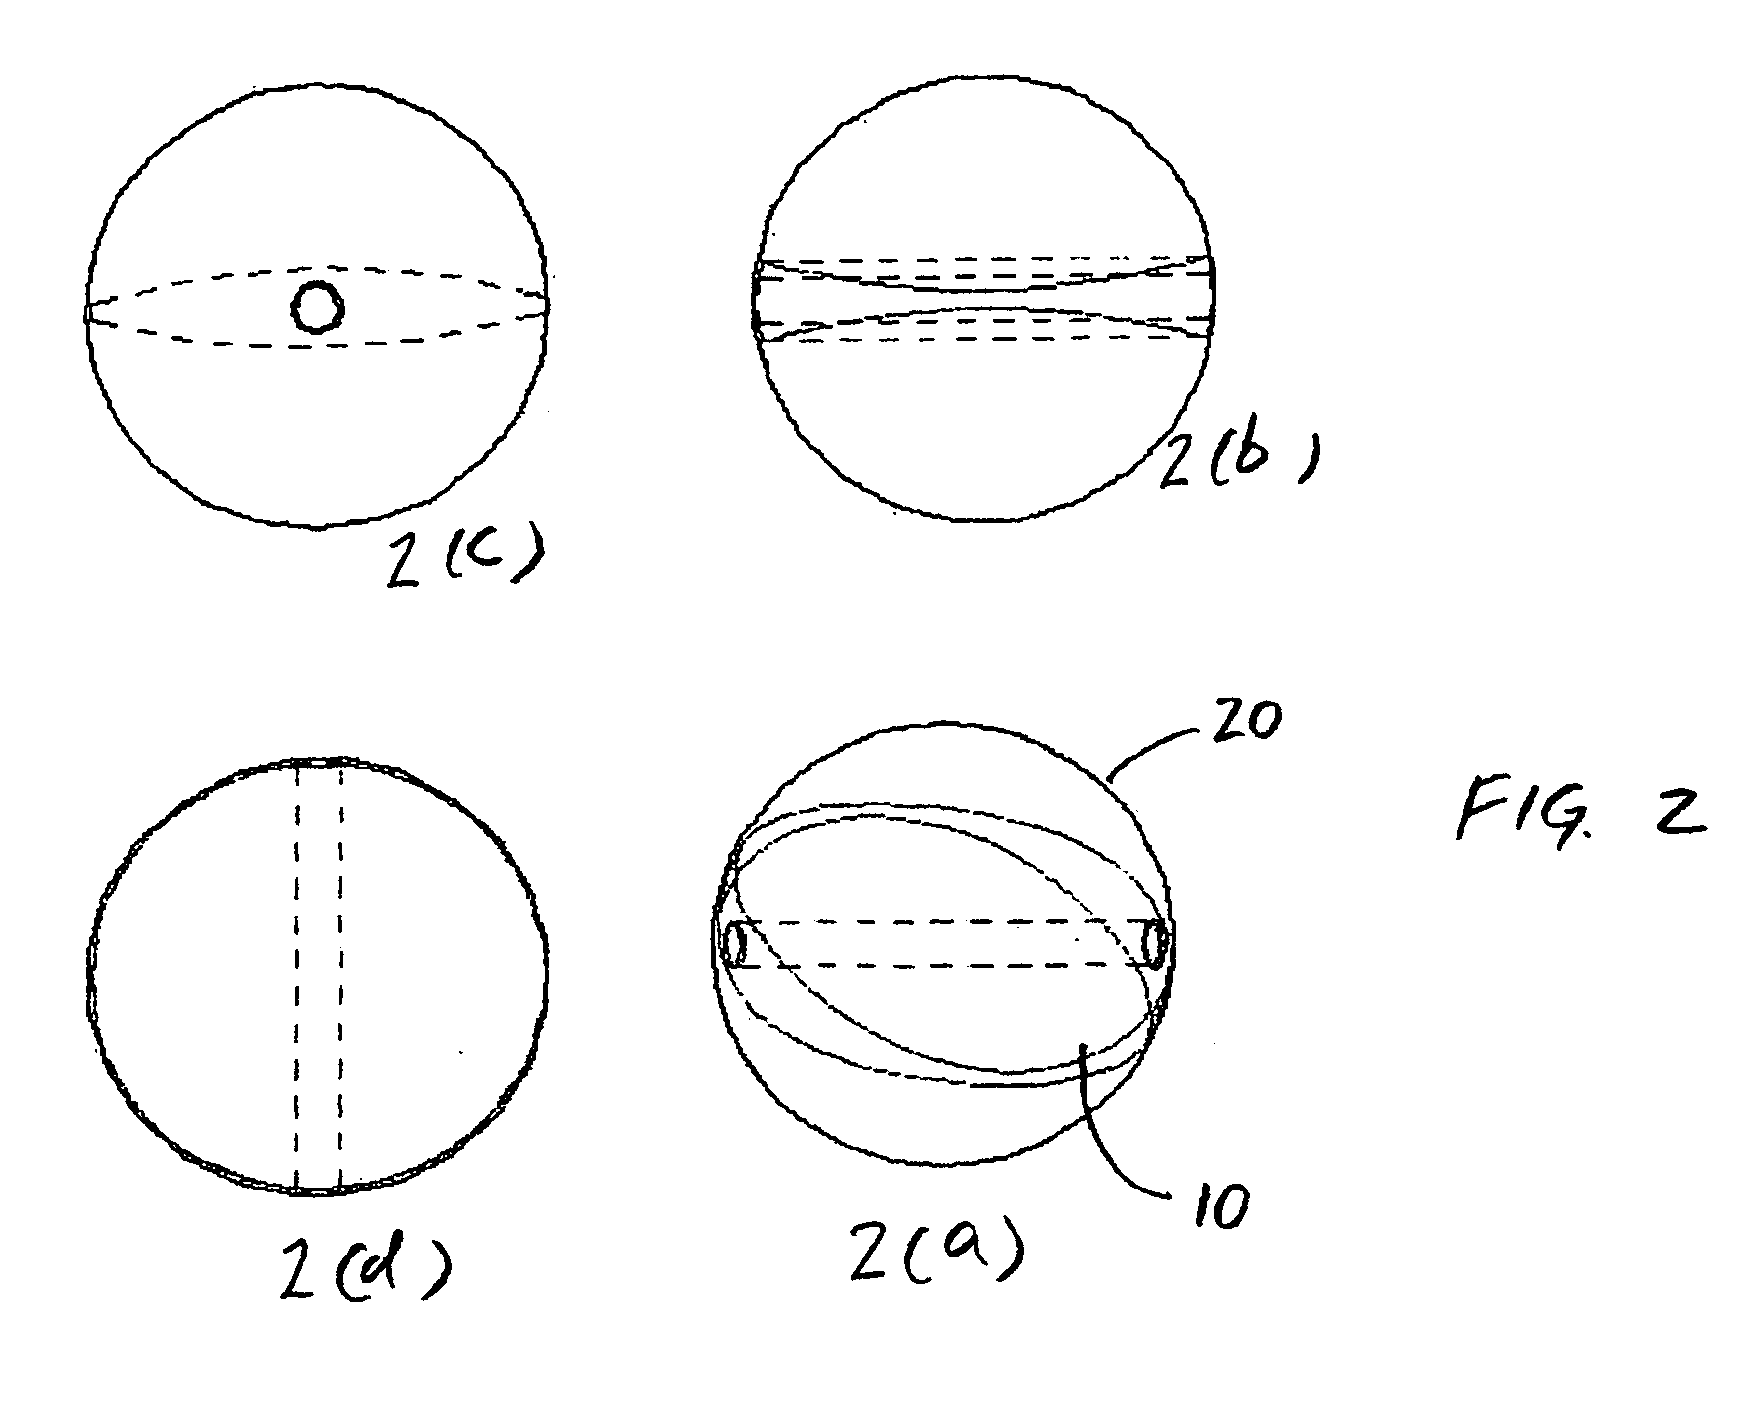 Ornamental beads and method of manufacture